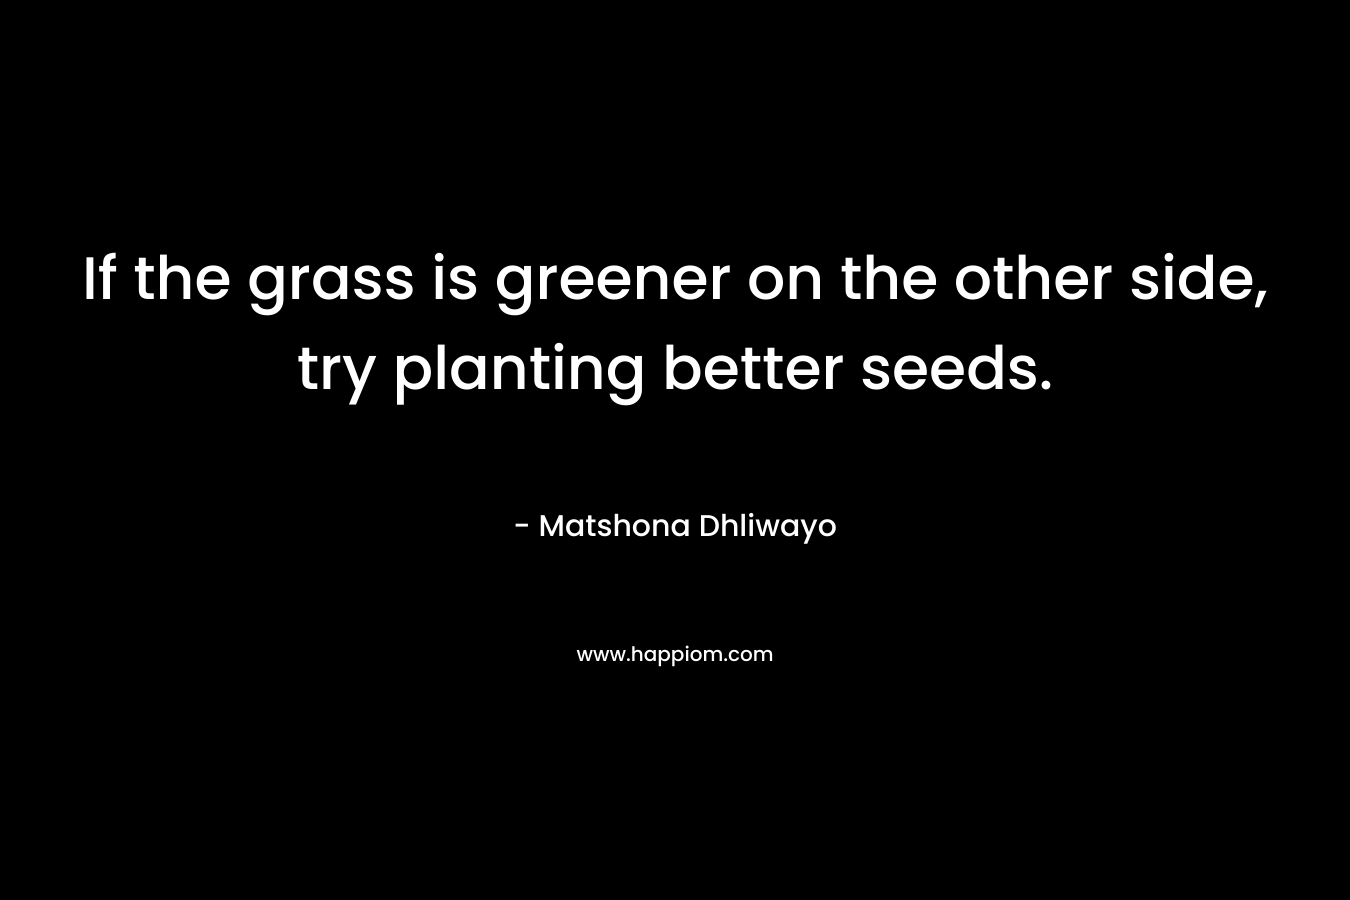 If the grass is greener on the other side, try planting better seeds.